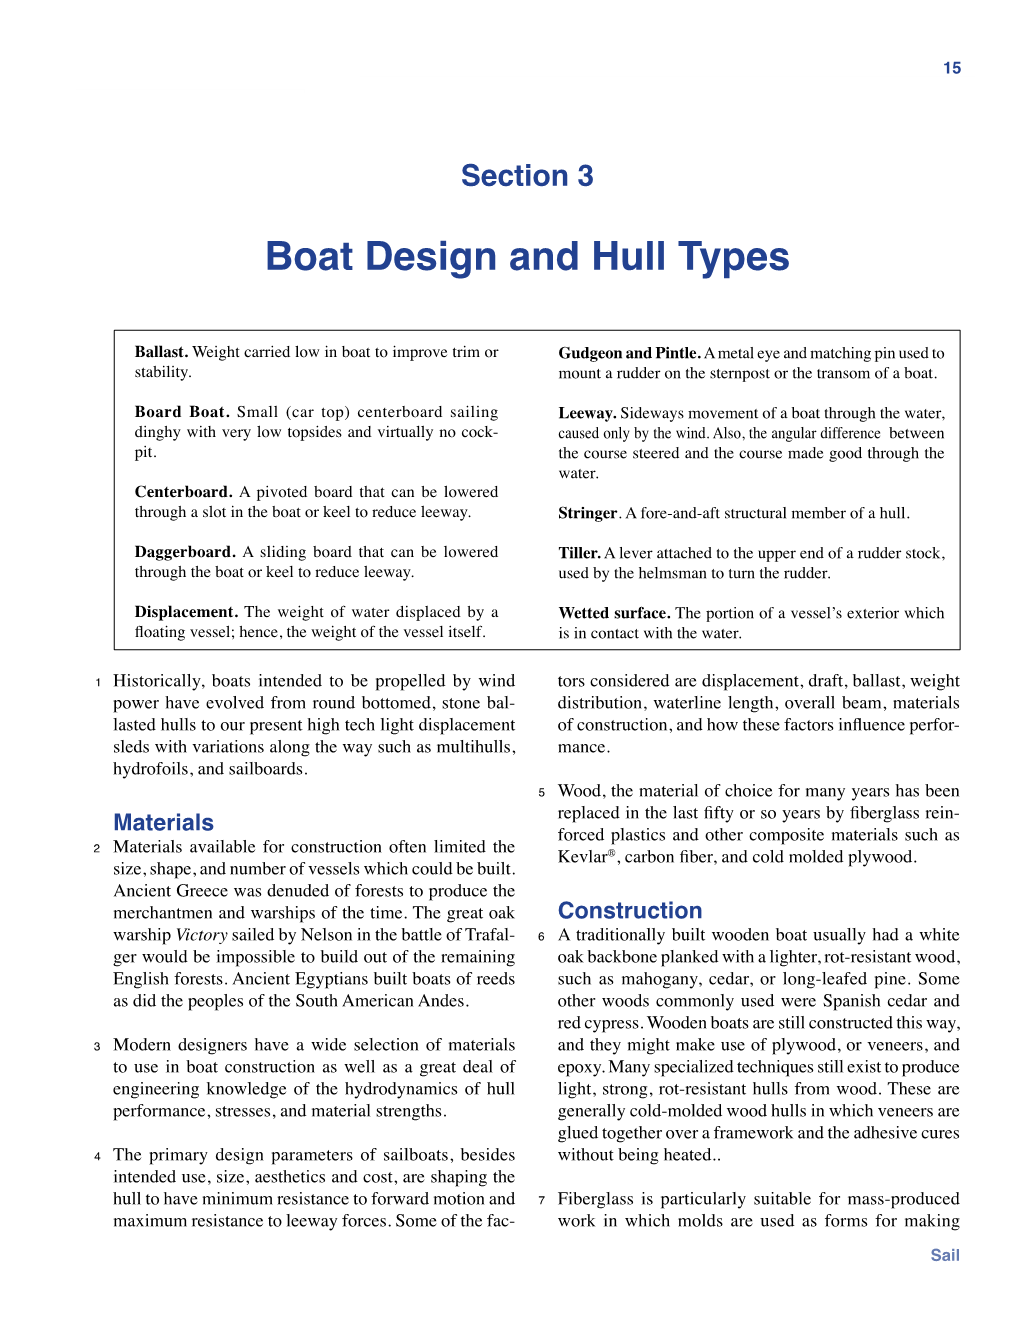 Boat Design and Hull Types 15